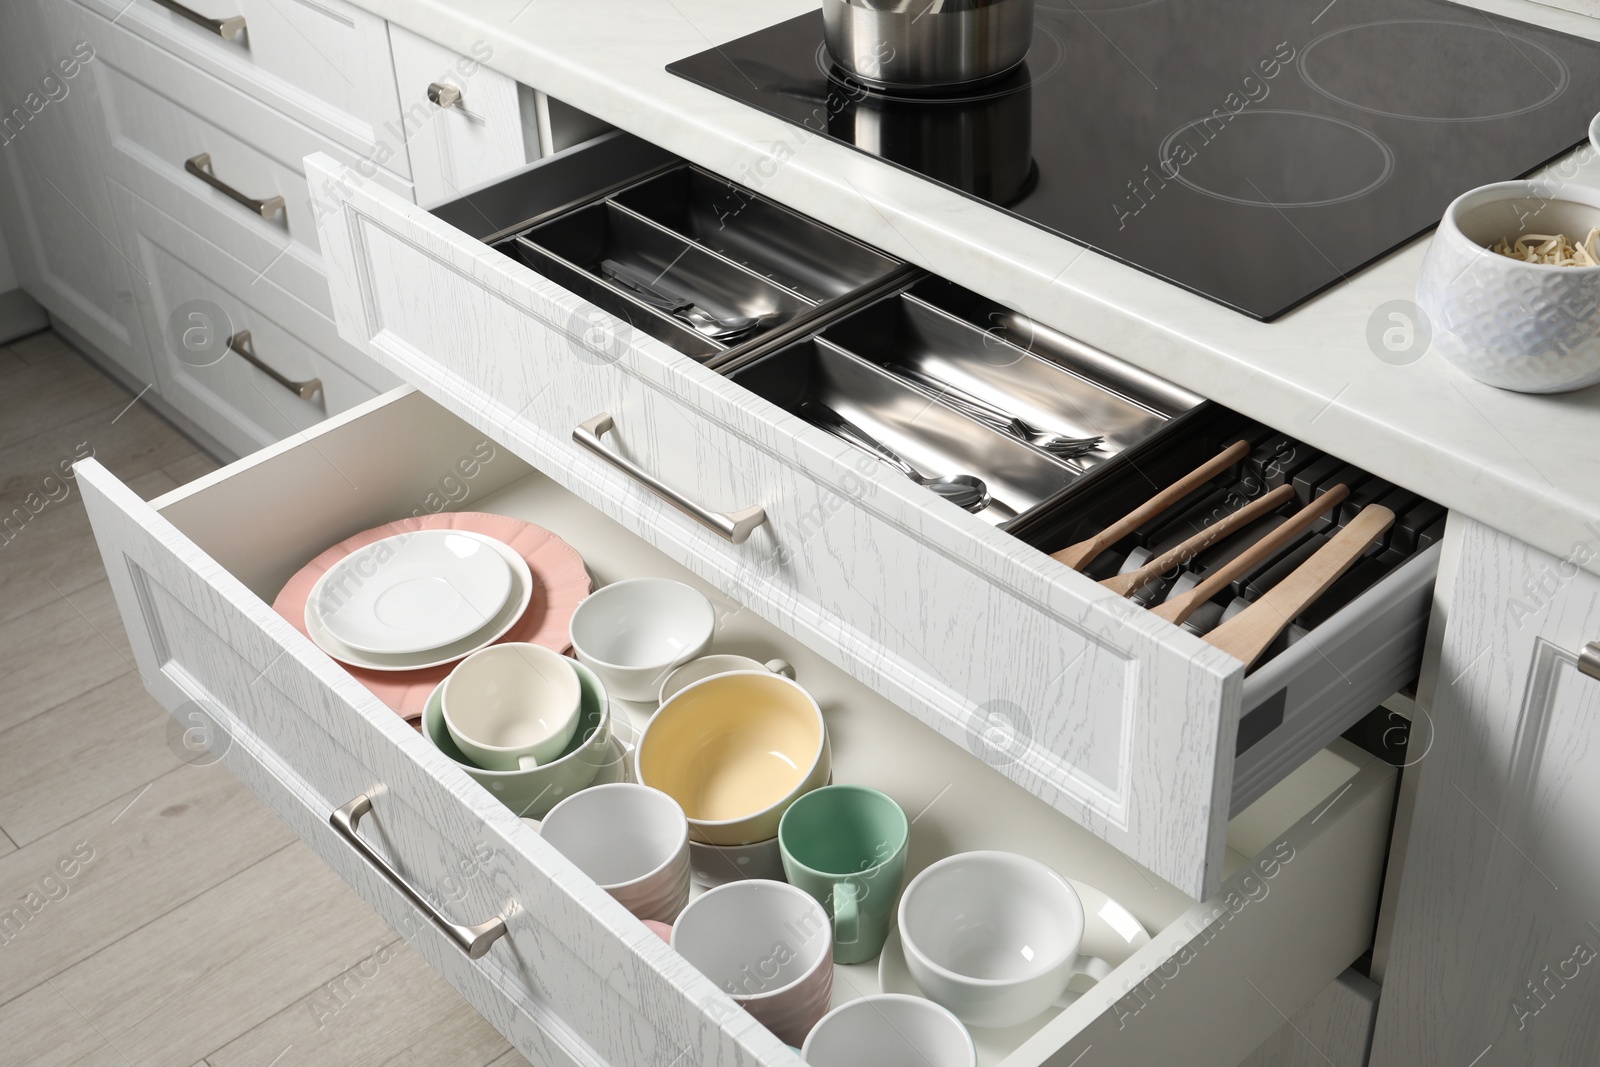 Photo of Ceramic dishware, utensils and cutlery in drawers in kitchen